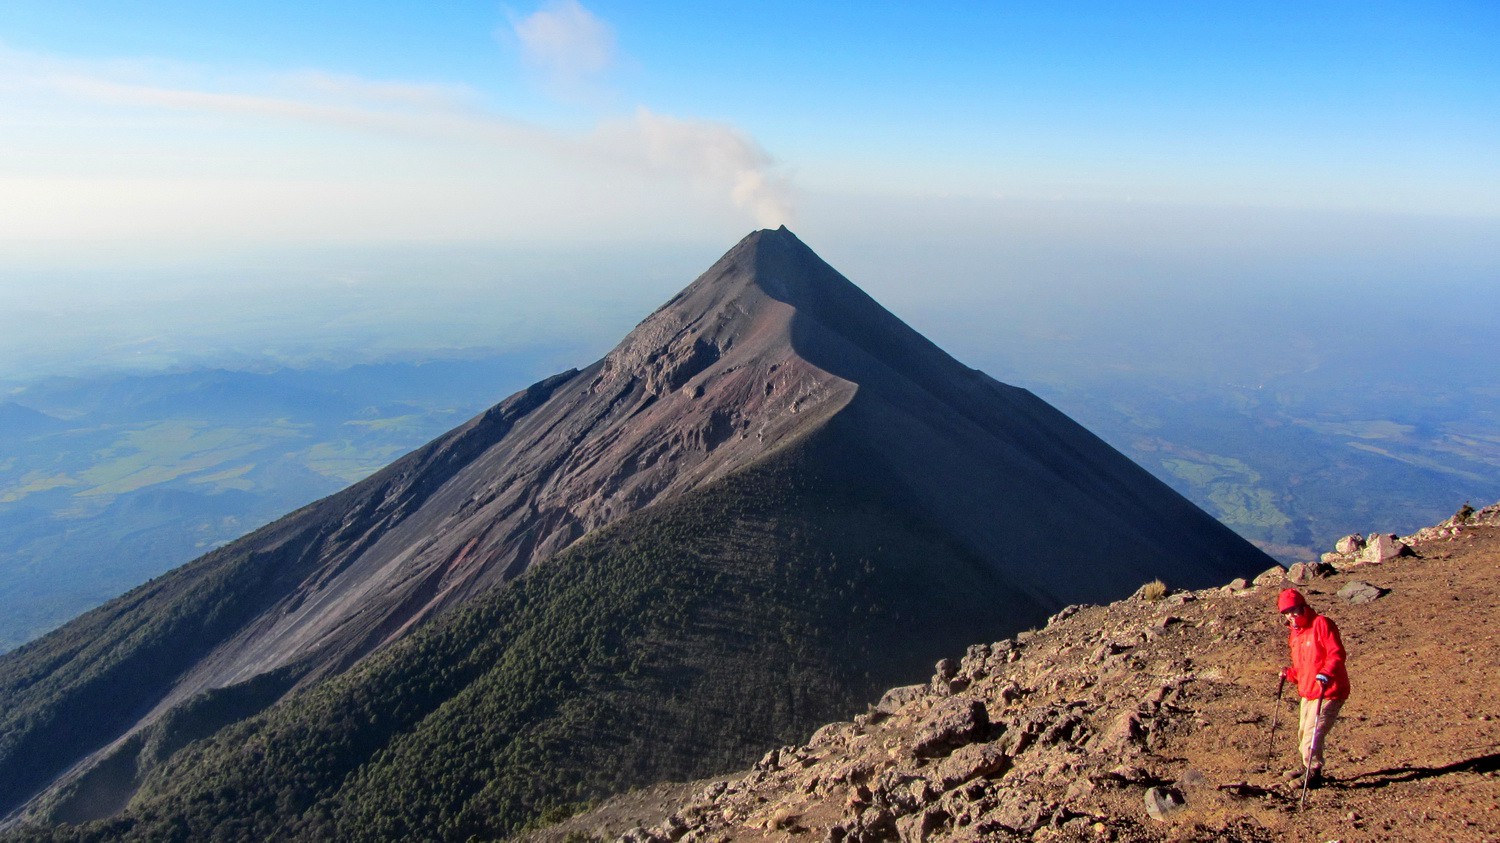 Smoking Volcan Fuego seeing from the top of Acatenango